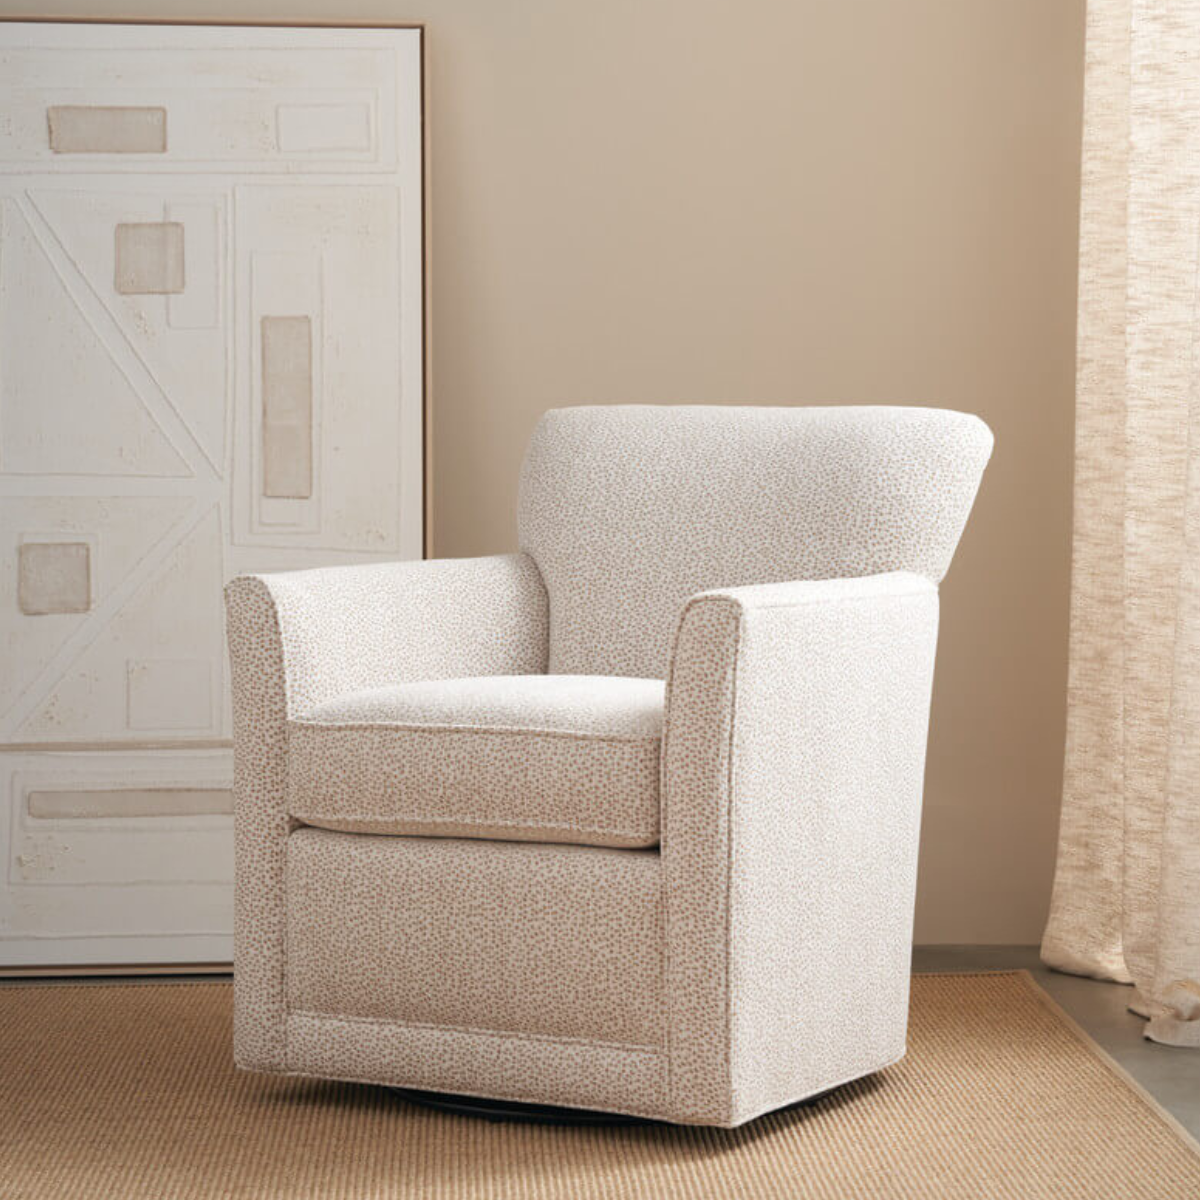 Times Square Swivel Glider Chair - Quick Ship | Rowe – Urban Natural Home